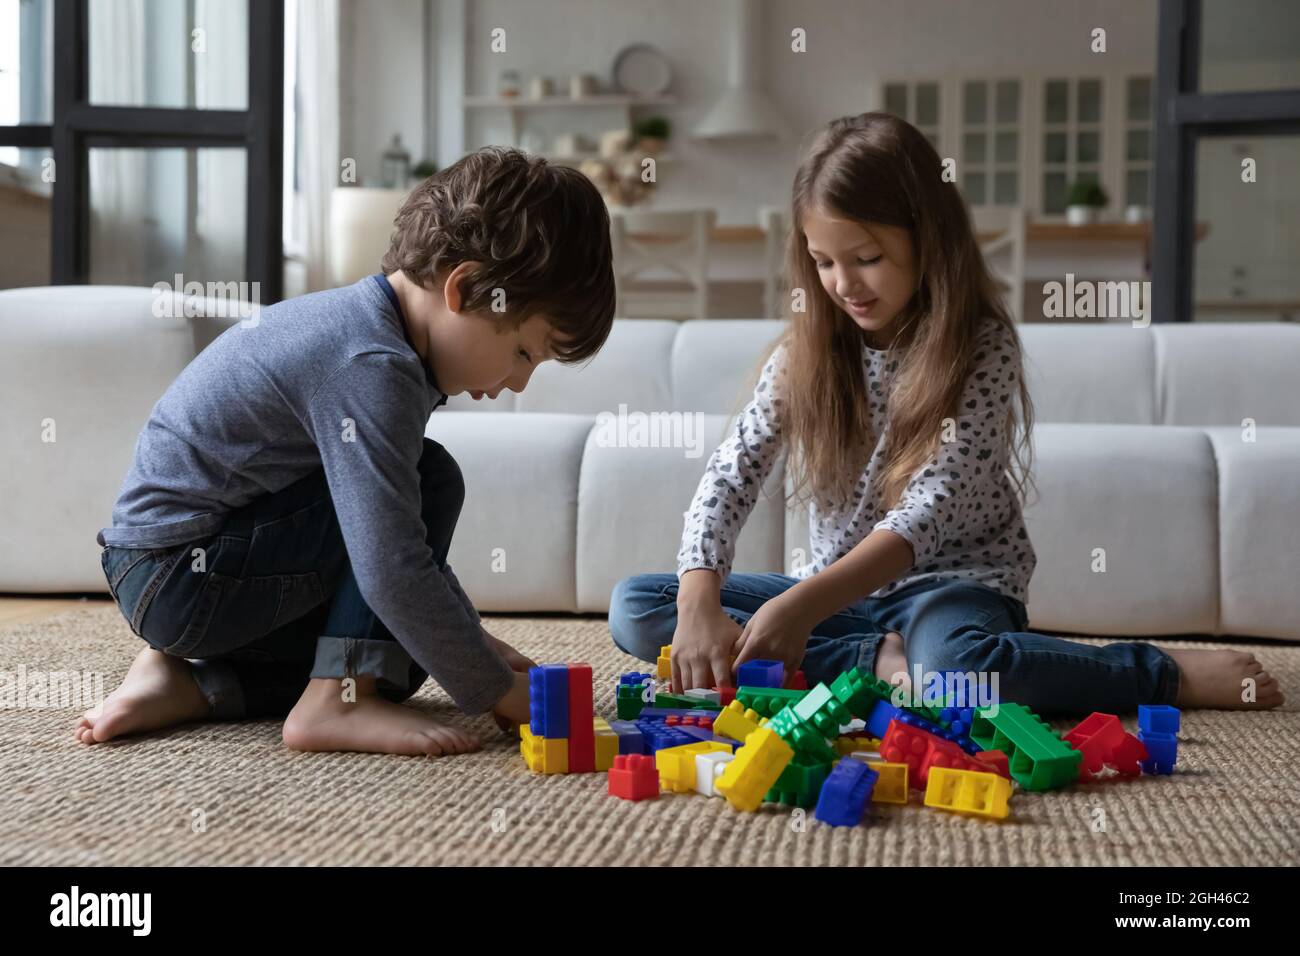 Cute sibling kids constructing toy tower, completing model Stock Photo